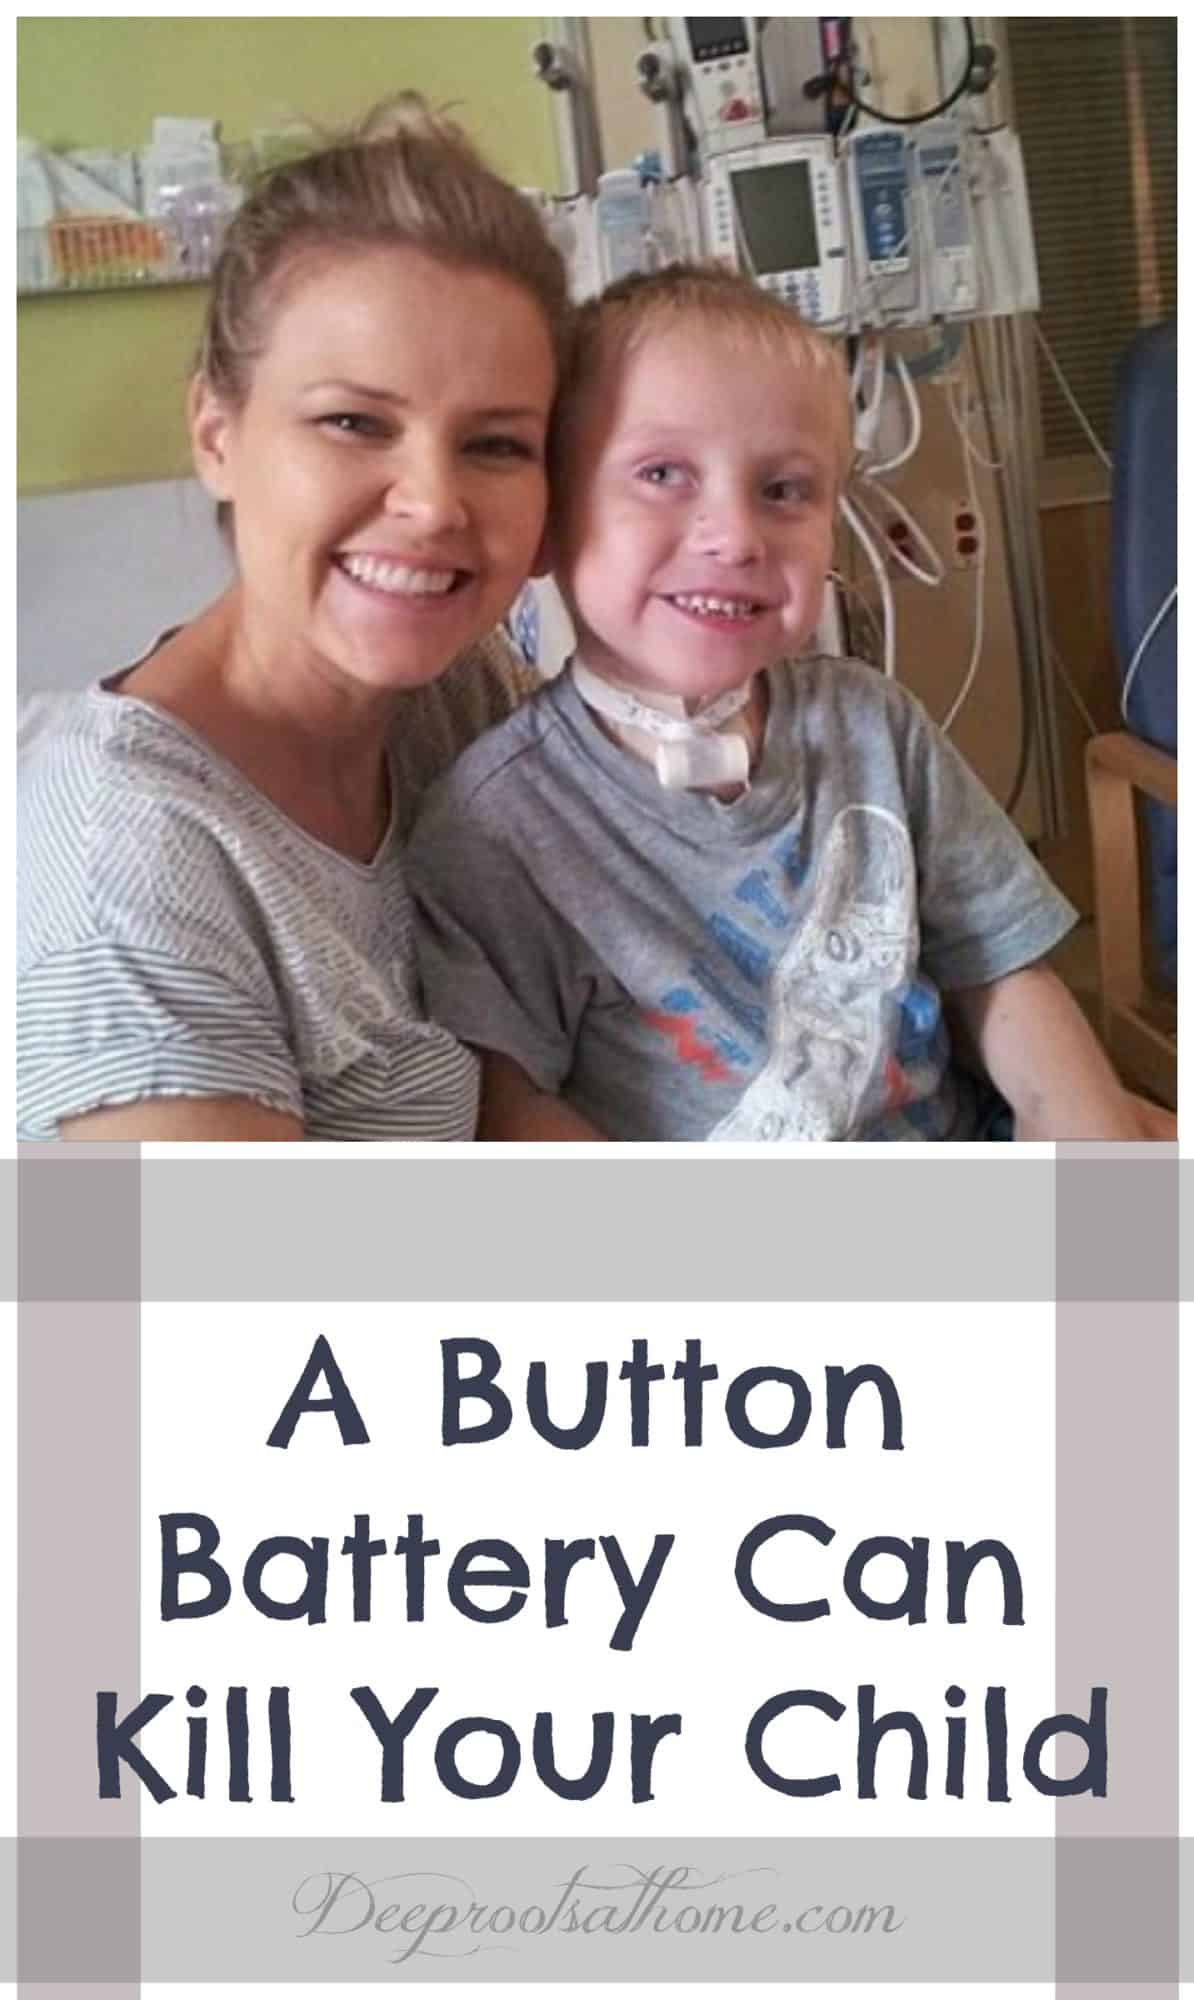 Parents: One Little Disc-Like Button Battery Can Kill Your Child, caution, household, homemaking, alert parents, danger, lithium batteries, fatal ingestion, SafeKids.org, Emmett's Fight foundation, Rauch Family, Emmett, accidental swallowing, prevention, keep batteries out of children's reach, safeguard kids, emergency, mini remote controls, small calculators, watches, key fobs, flameless candles, electronics, severe burns, preventable accident in children, toddler, babies, alert, pediatrics, emergency room, musical greeting cards, x-ray, button battery in child's throat